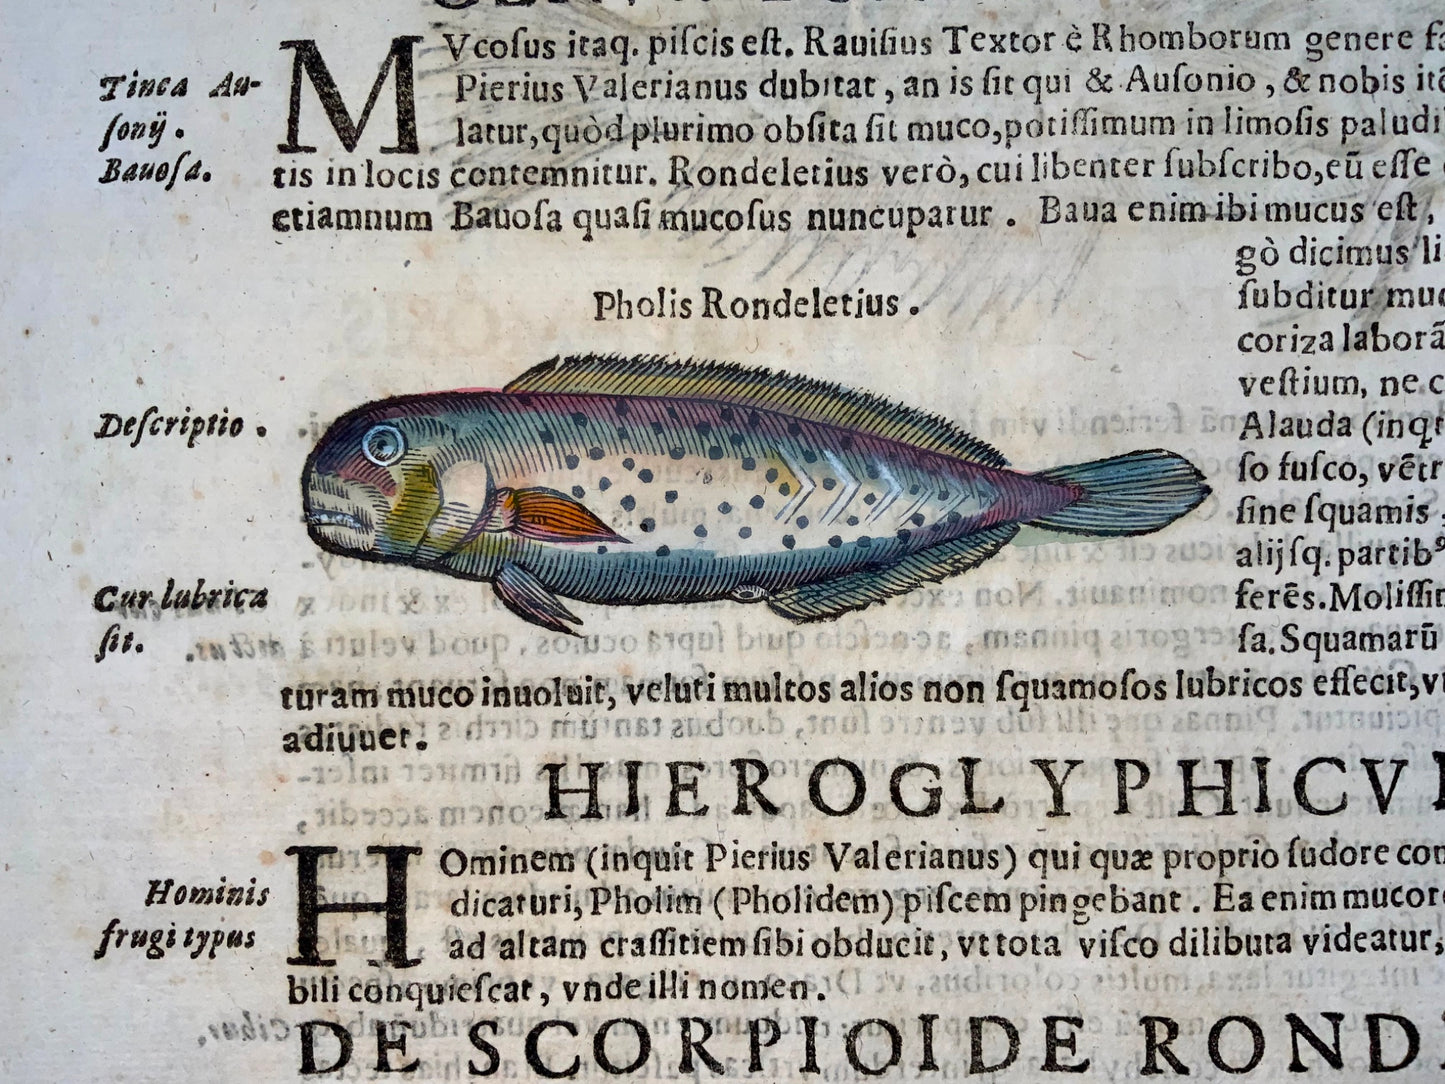 1638 Weever, ray-finned fish, Aldrovandi, large folio leaf with 3 woodcuts